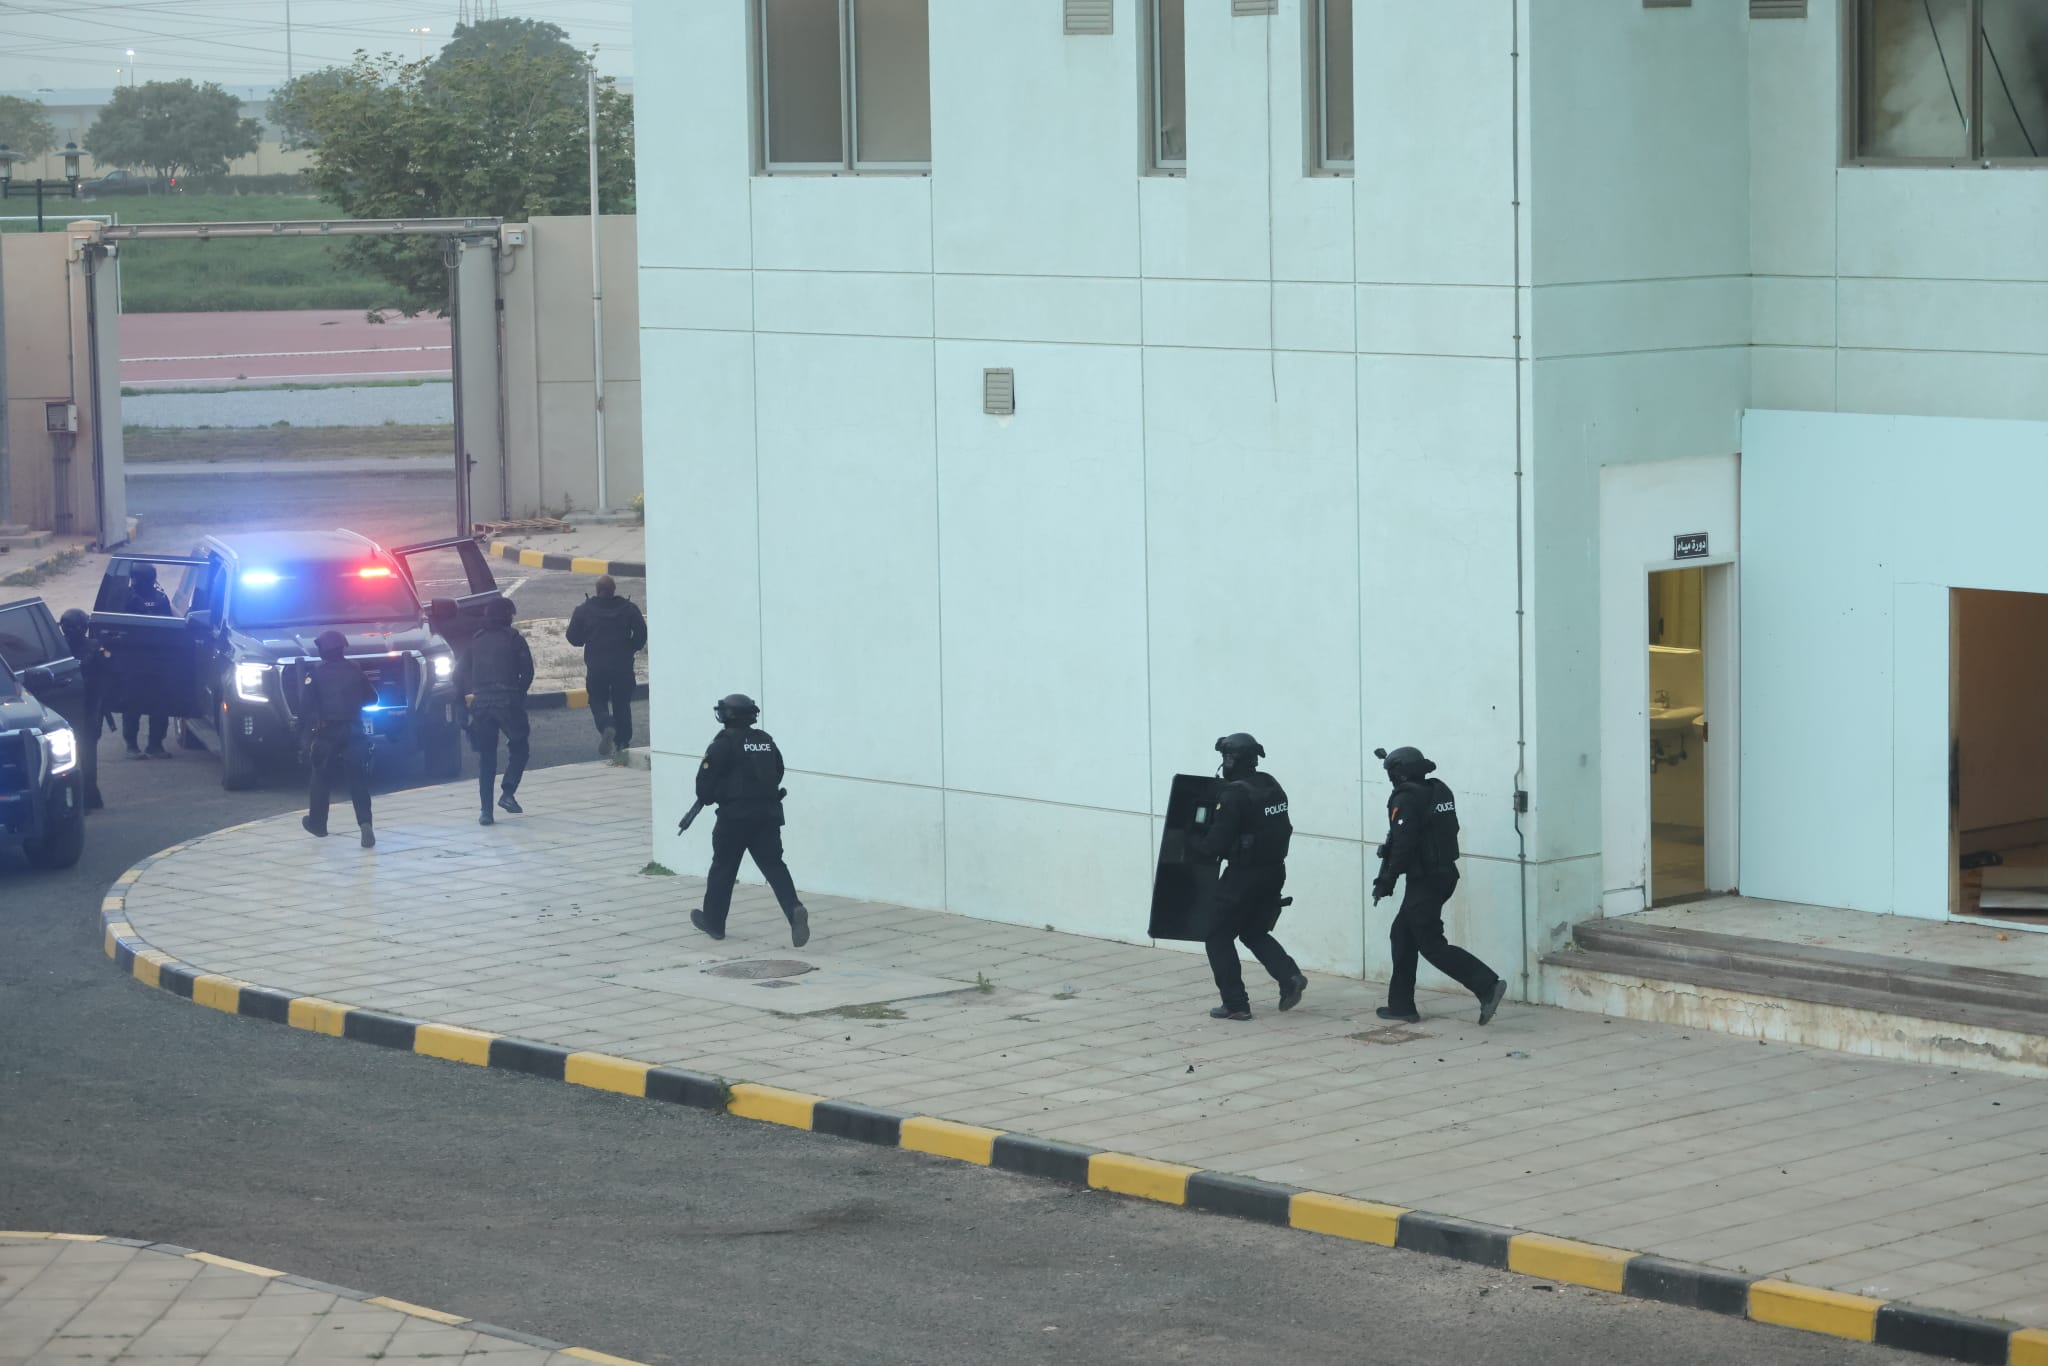 Mock drills demonstrate combat skills of Kuwait’s security forces